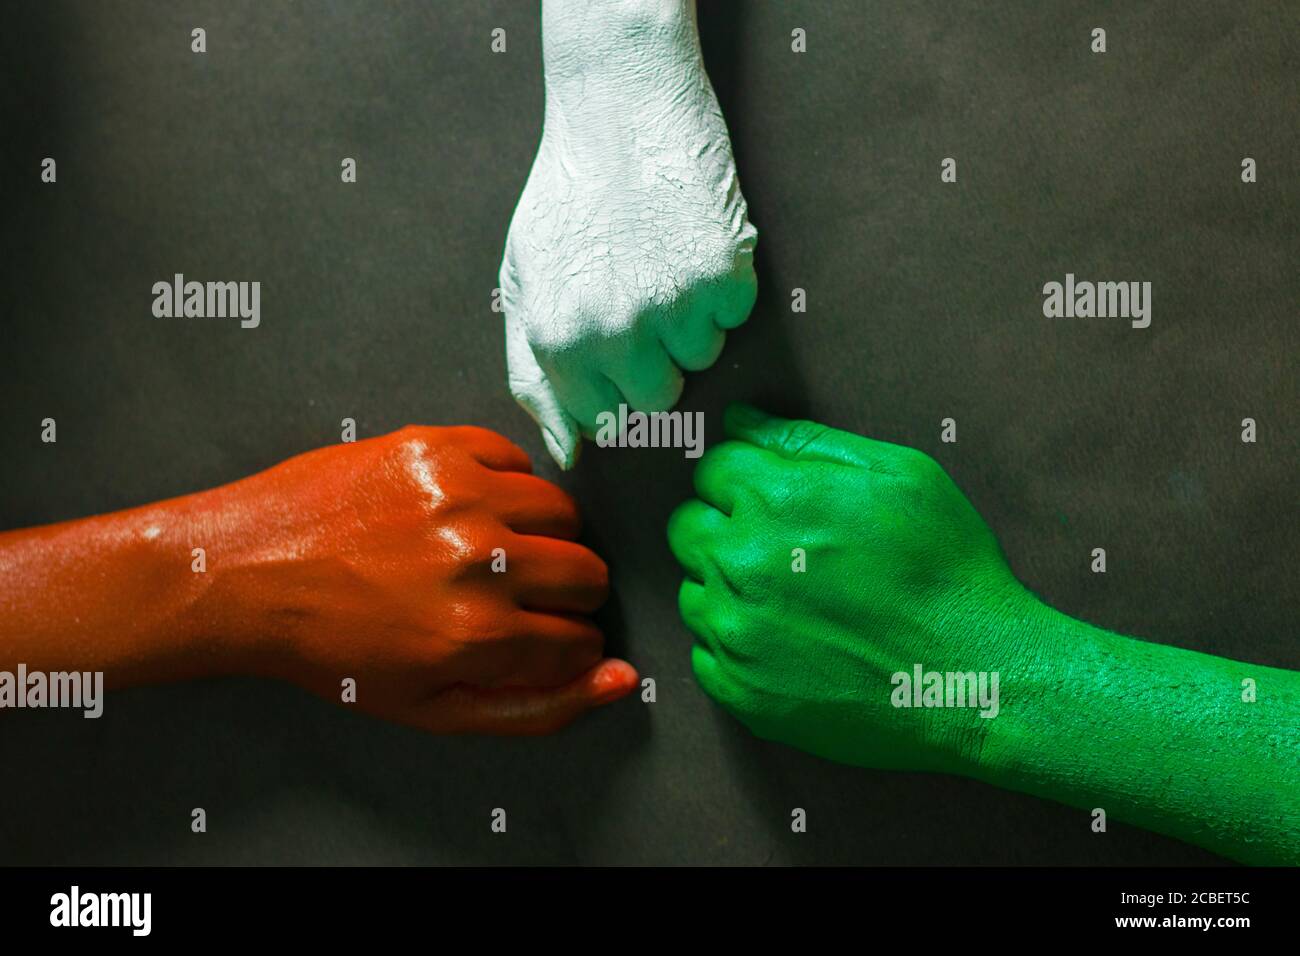 three hands are painted with three colors,saffron,white and green to represent tricolor Indian national flag.15 August Independence day India. Stock Photo